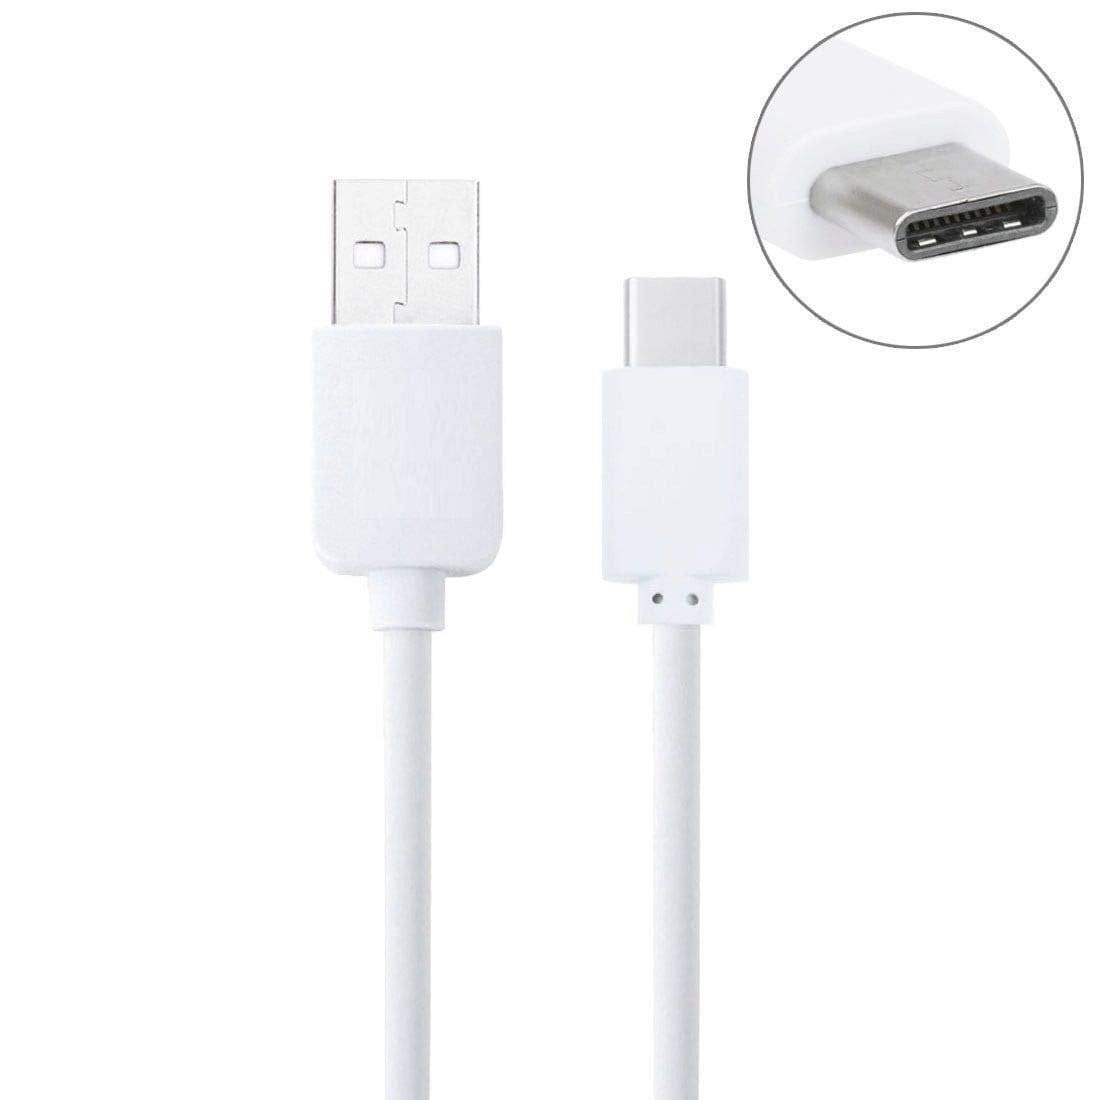 Samsung Galaxy S20 USB to Type C Charging Cable Lead White - 1M - SmartPhoneGadgetUK